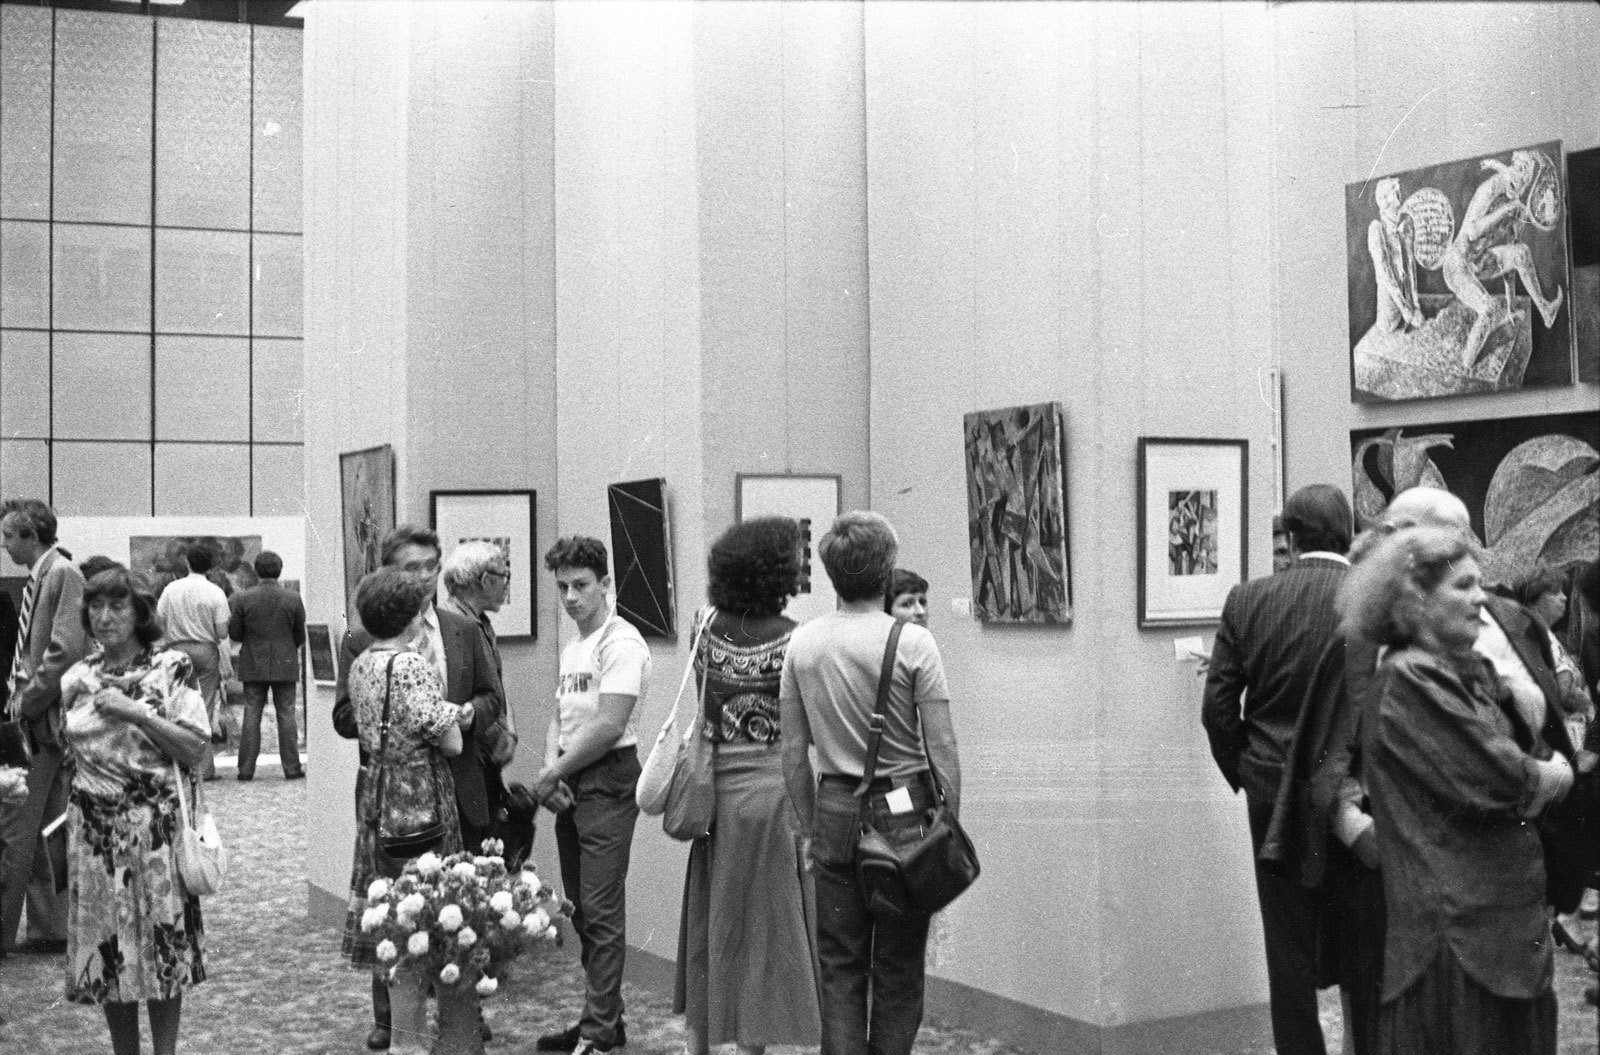 Pre-auction exhibition of Sotheby&rsquo;s Russian Avant-Garde and Soviet Contemporary Art at Sovincentr, Moscow, July 2&ndash;7, 1988Photo: Alexander Lavrentiev&copy; Alexander Lavrentiev